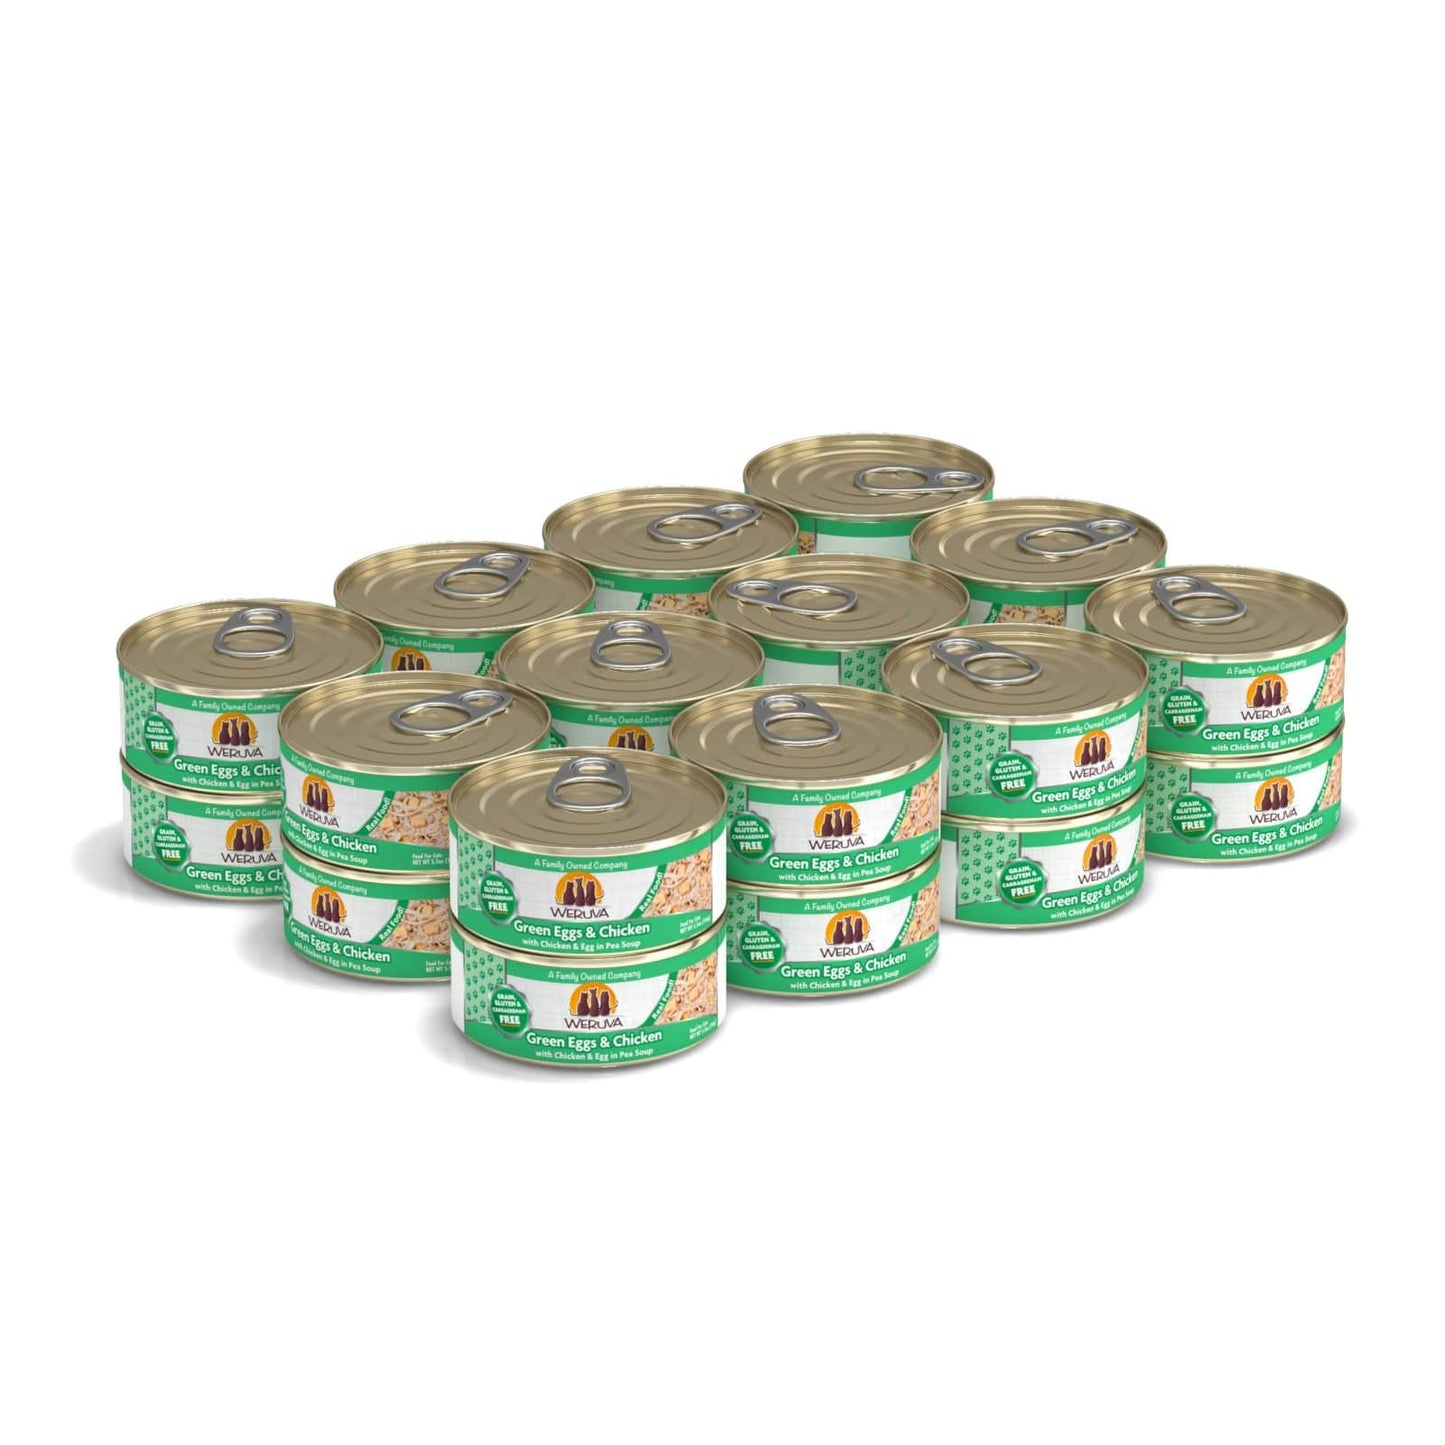 Weruva Green Eggs and Chicken with Chicken and Egg in Pea Soup, Wet Cat Food, 5.5-oz Case of 24